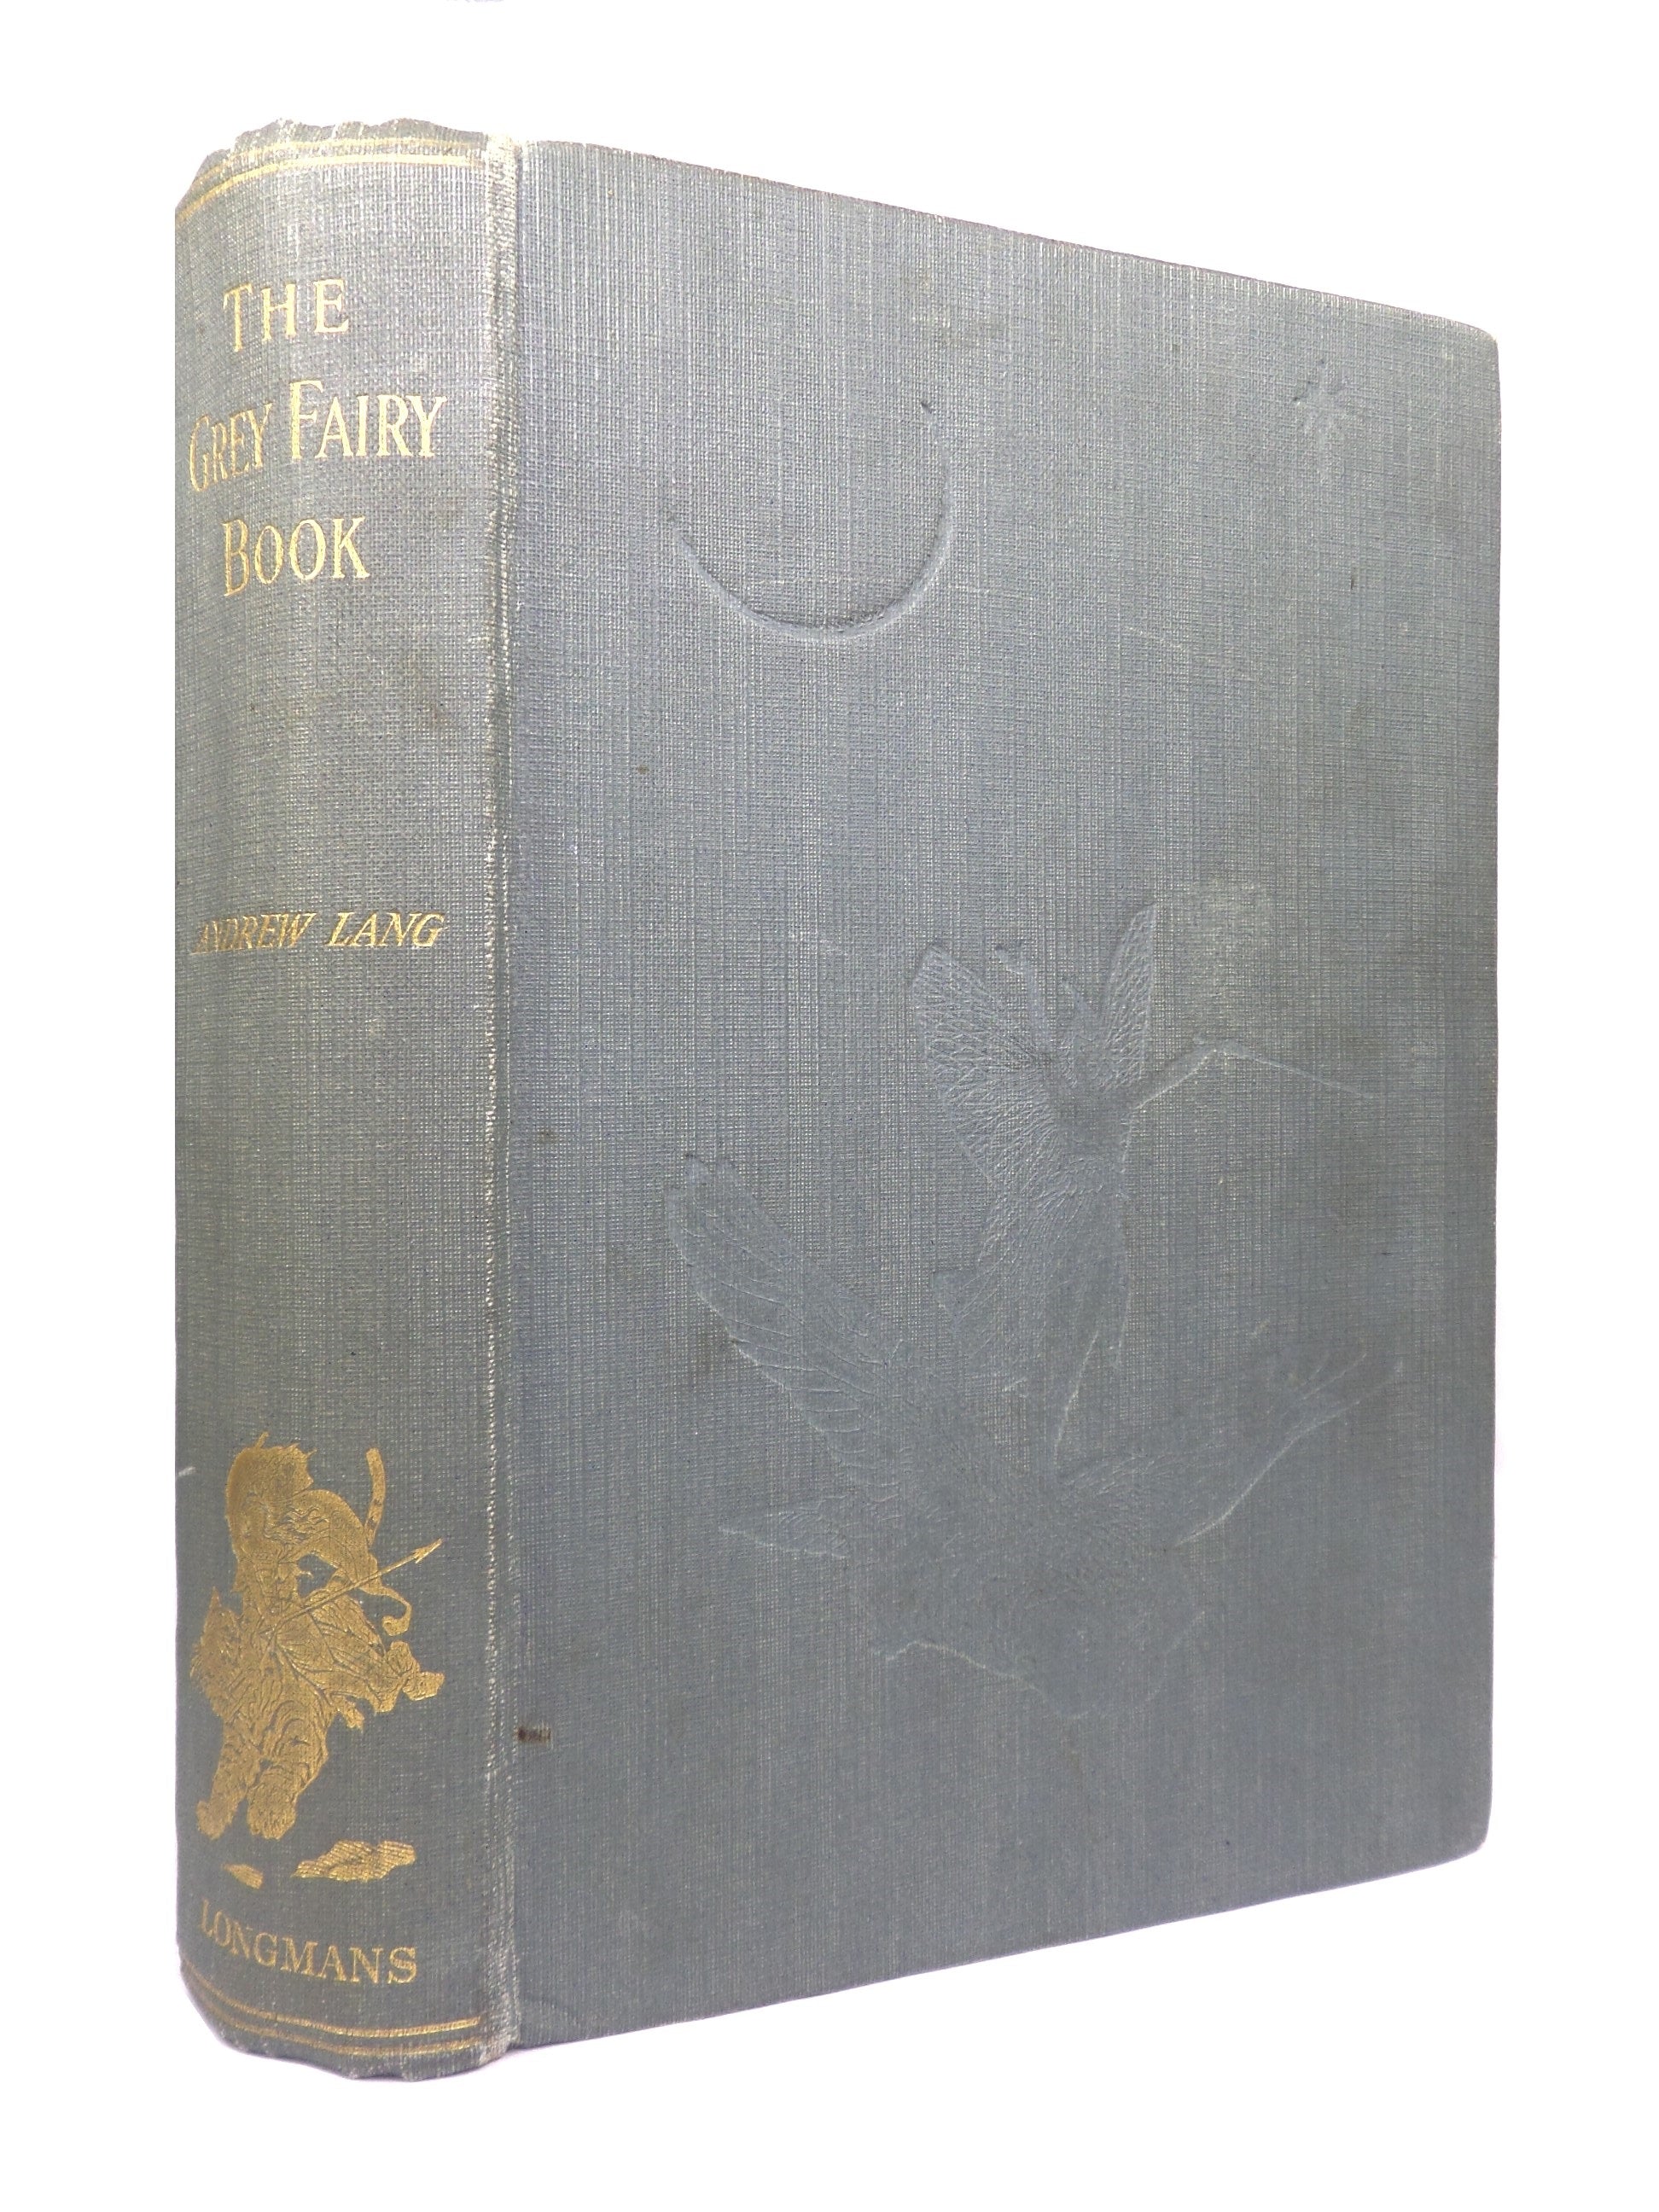 THE GREY FAIRY BOOK BY ANDREW LANG 1937 HARDCOVER